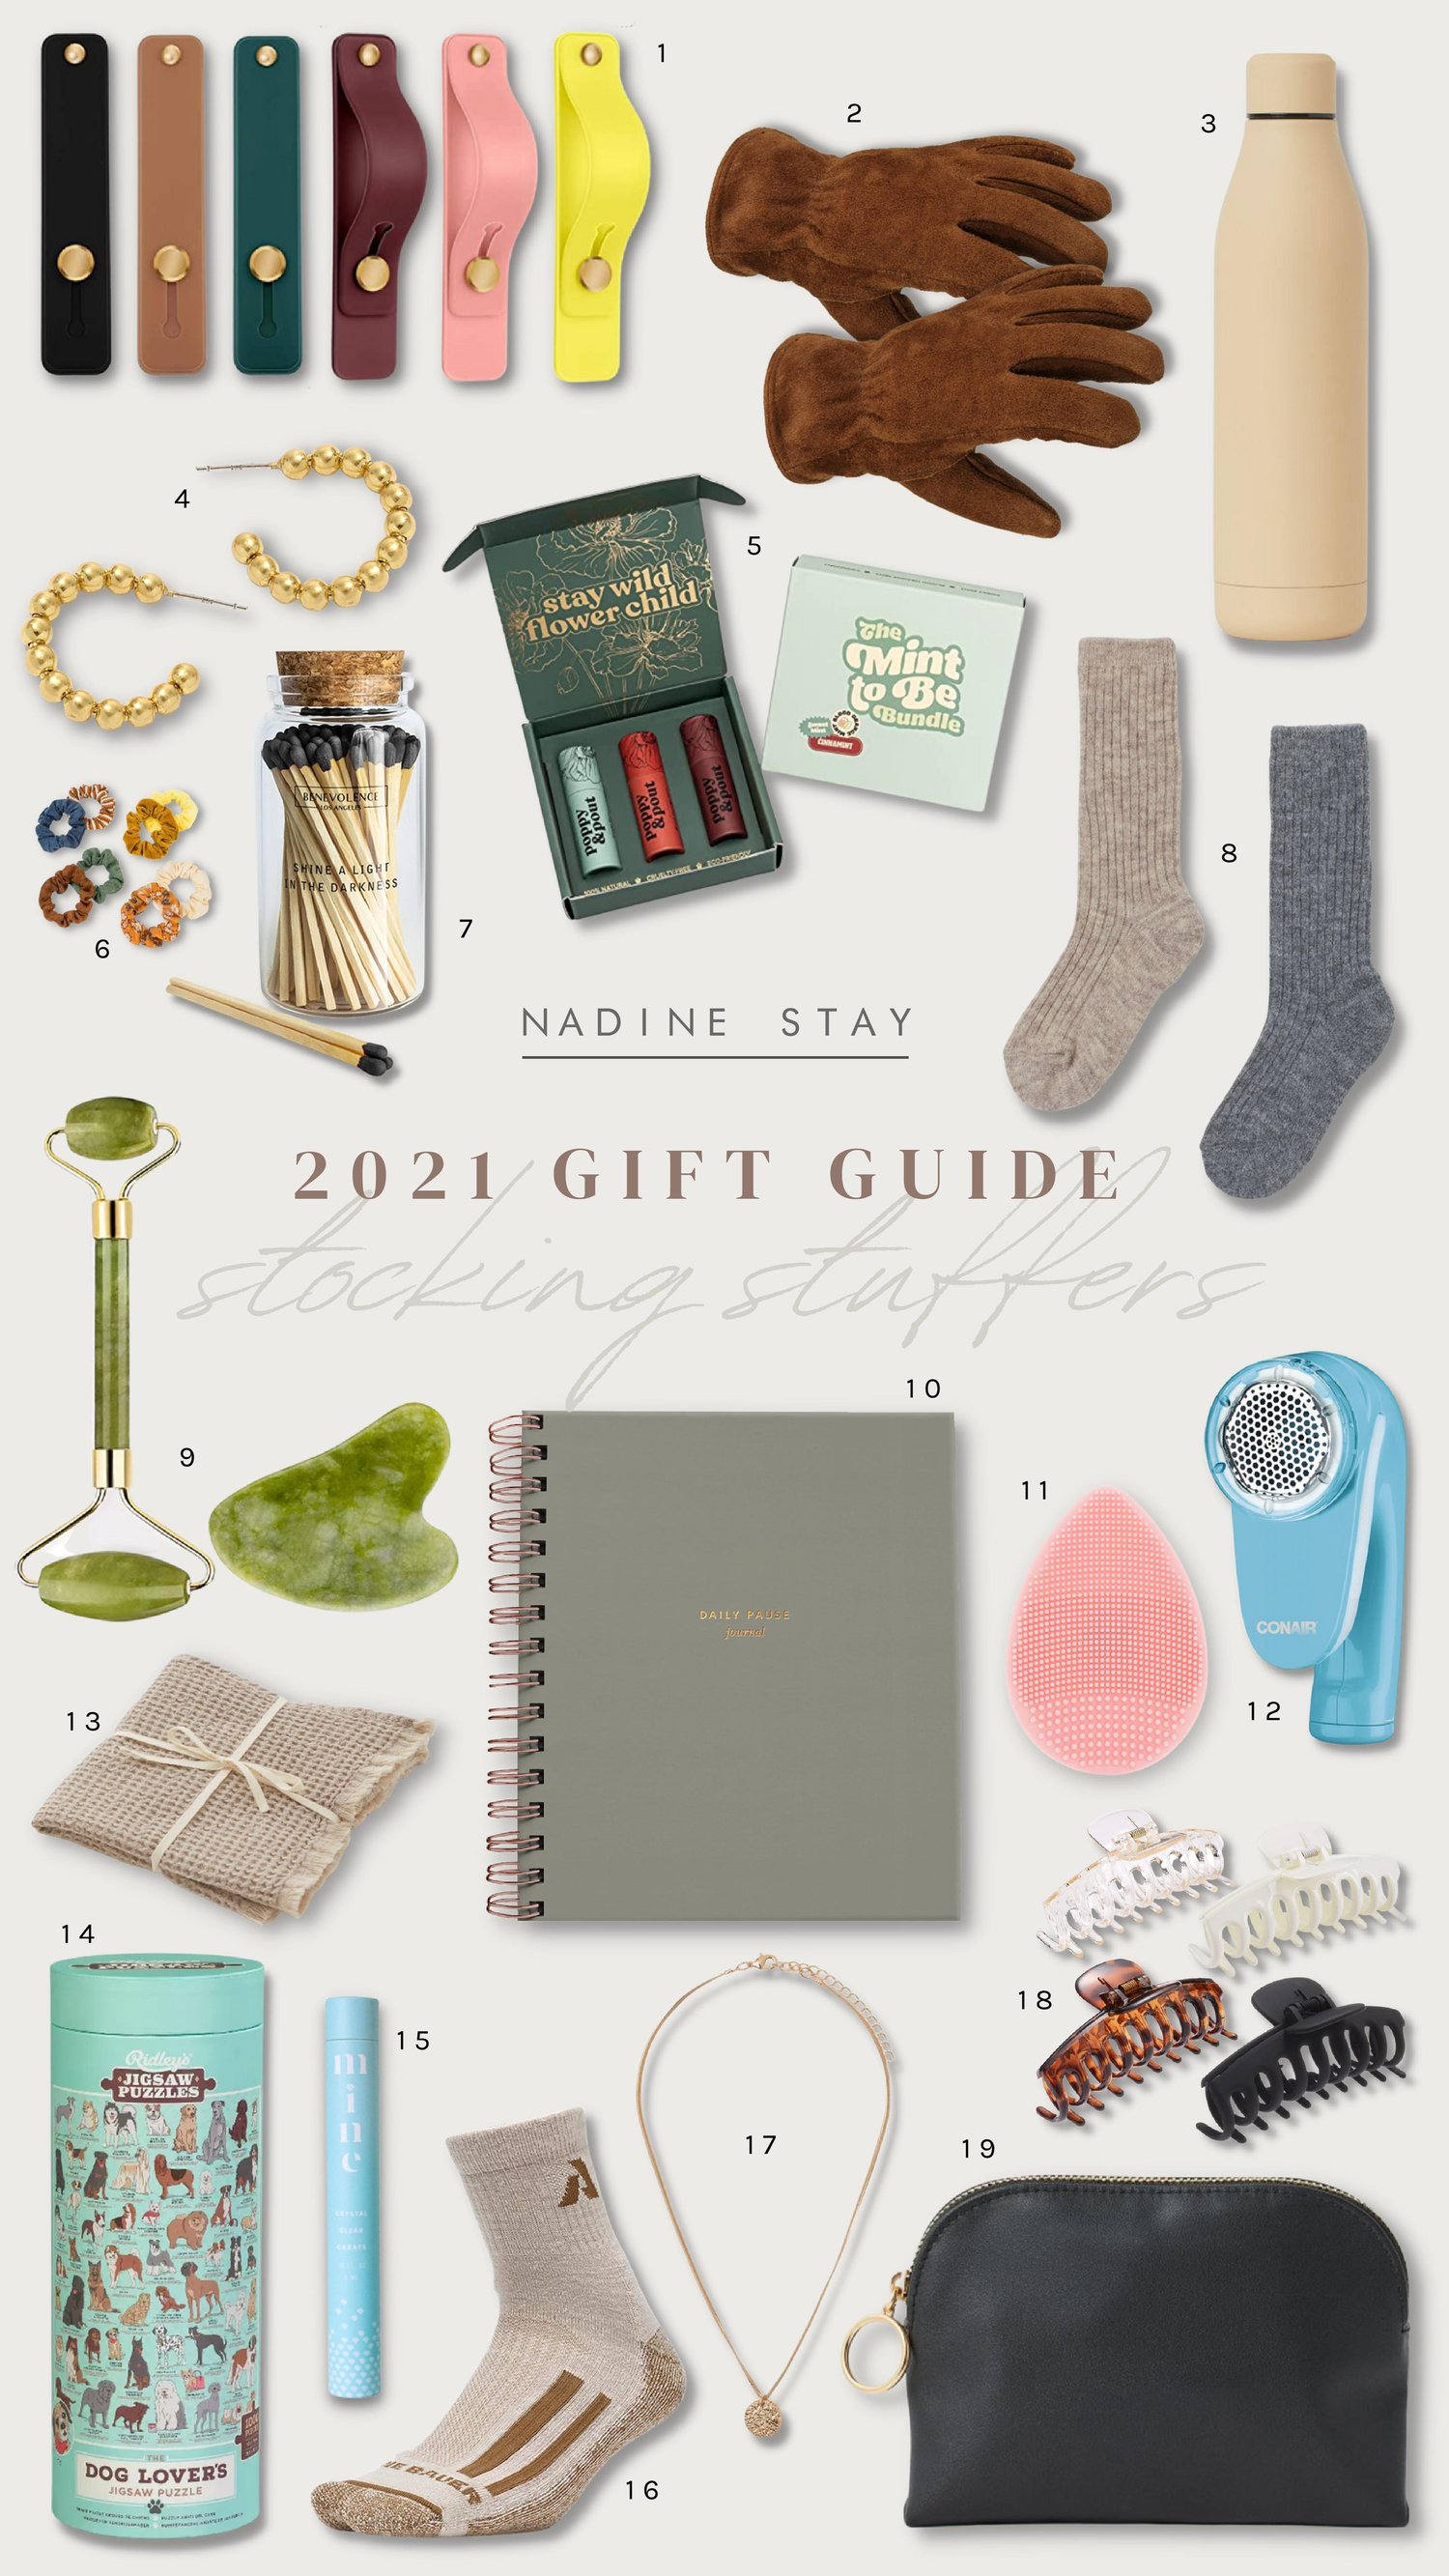 Holiday Stocking Sfuffers Gift Guide for Him